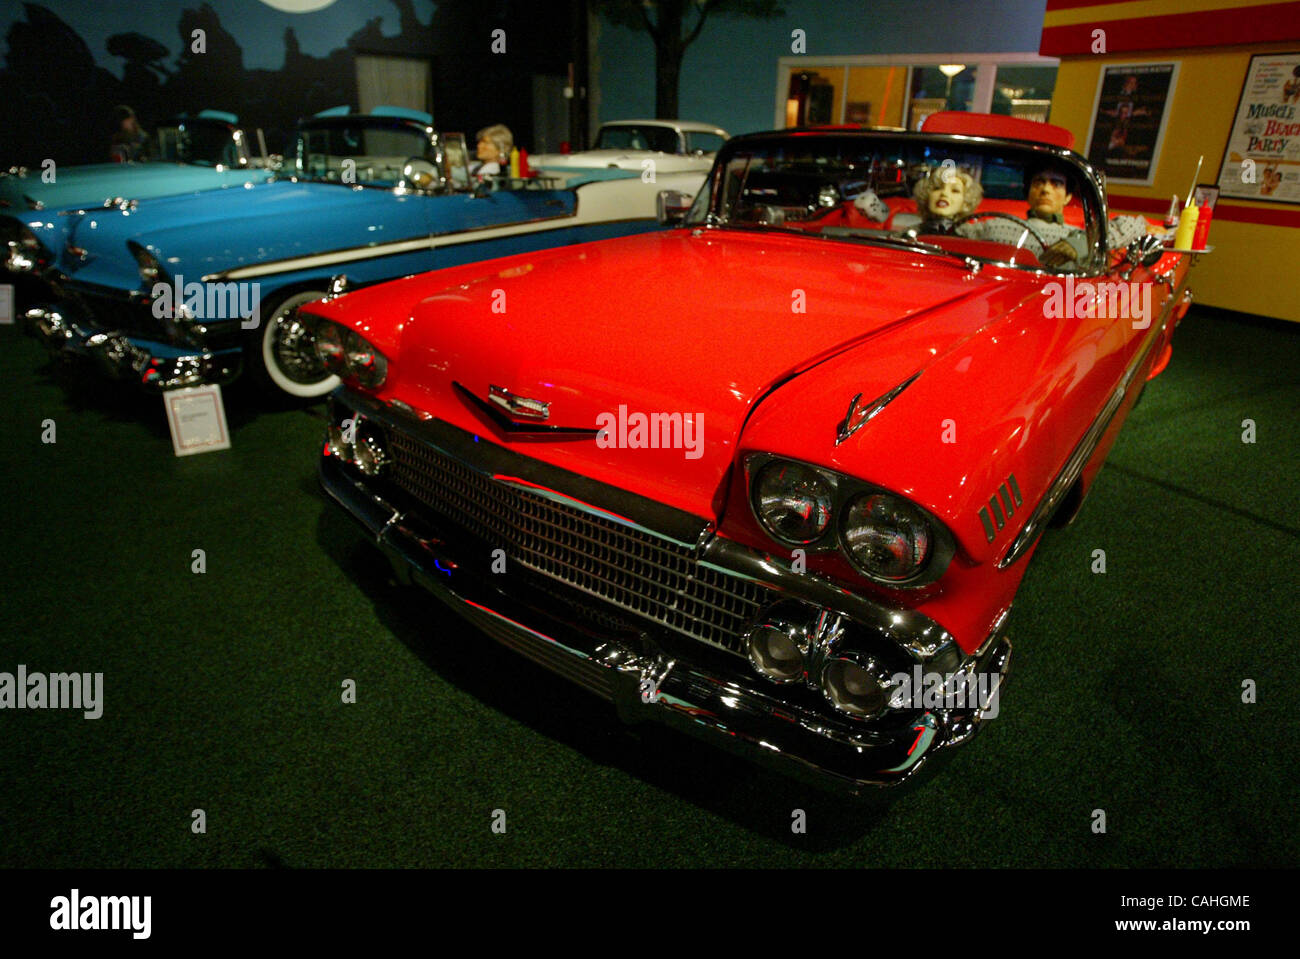 011808 met staluppi 10--Staff Photo by Uma Sanghvi/The Palm Beach Post-0047803A--For story by Jose Lambiet--North Palm Beach--Shown here is a 1958 Chevrolet Impala Convertible, from the private car museum of John Staluppi, photographed at a gala Friday night. NOT FOR DISTRIBUTION OUTSIDE COX PAPERS. Stock Photo